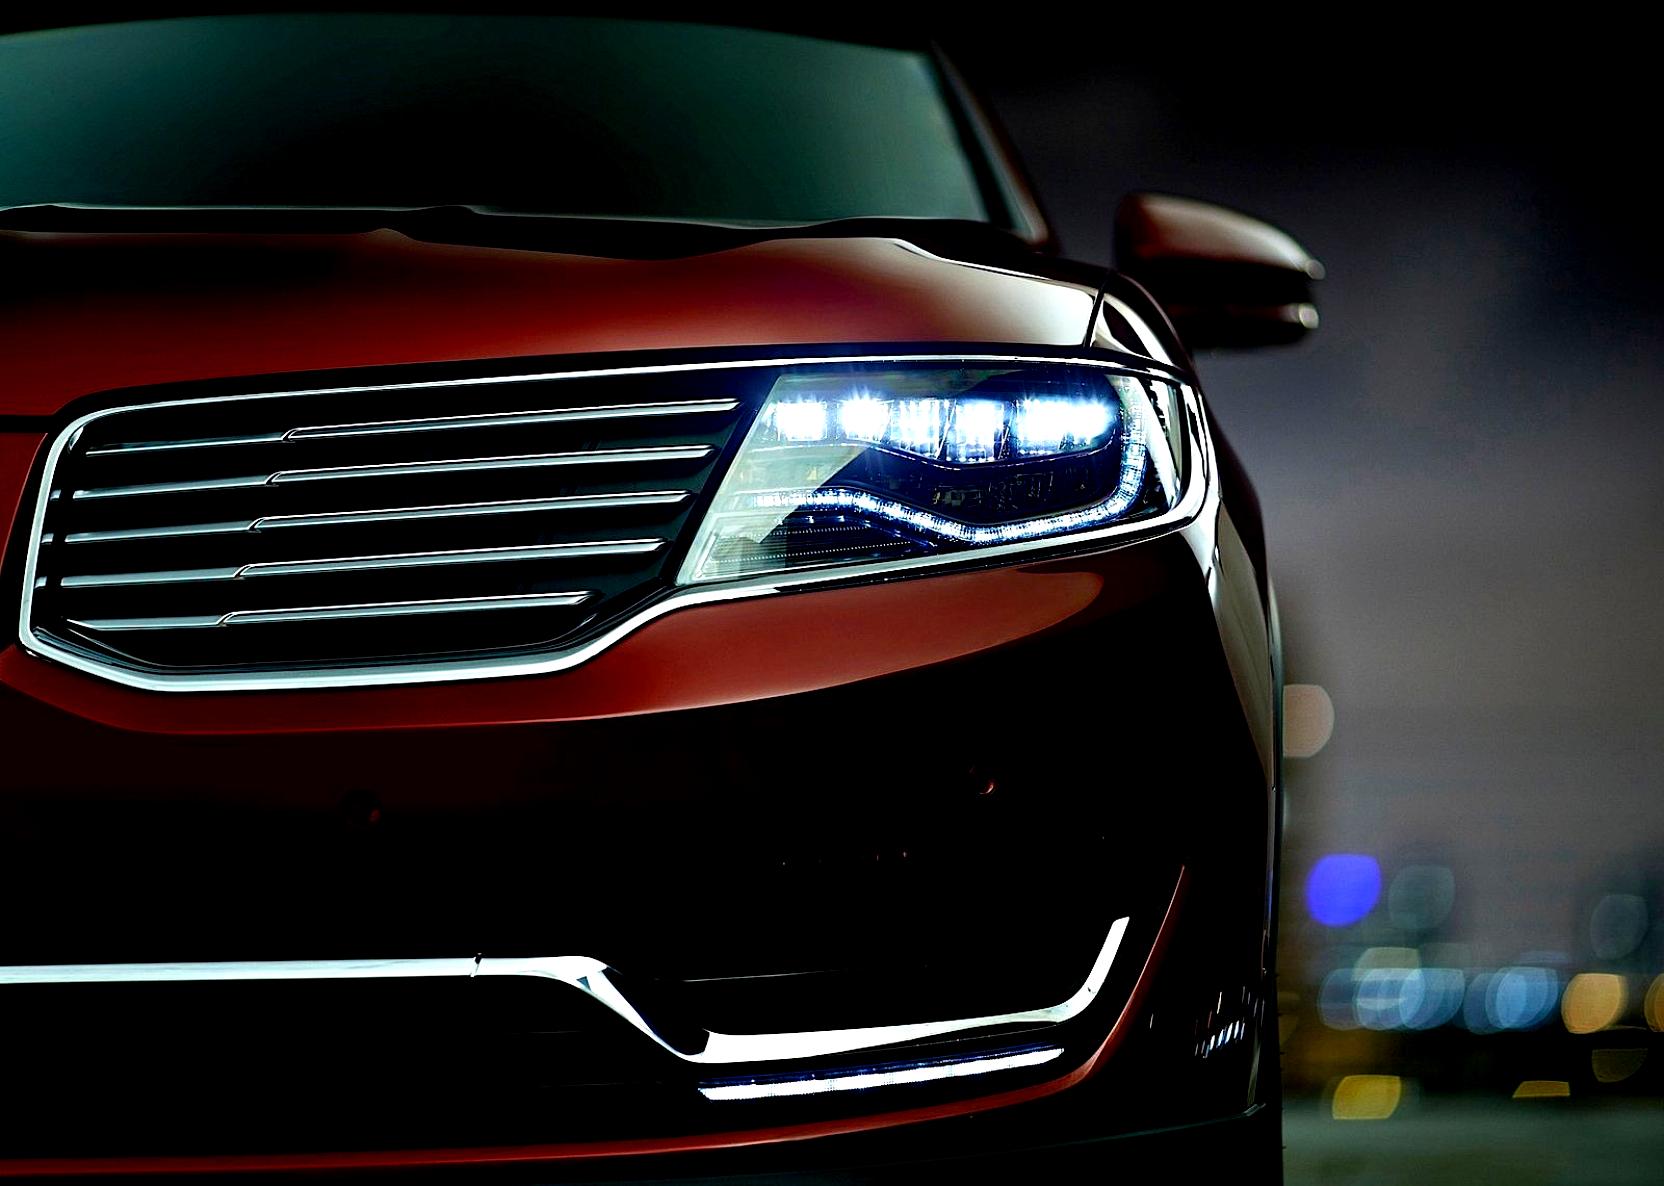 Lincoln MKX 2016 #28